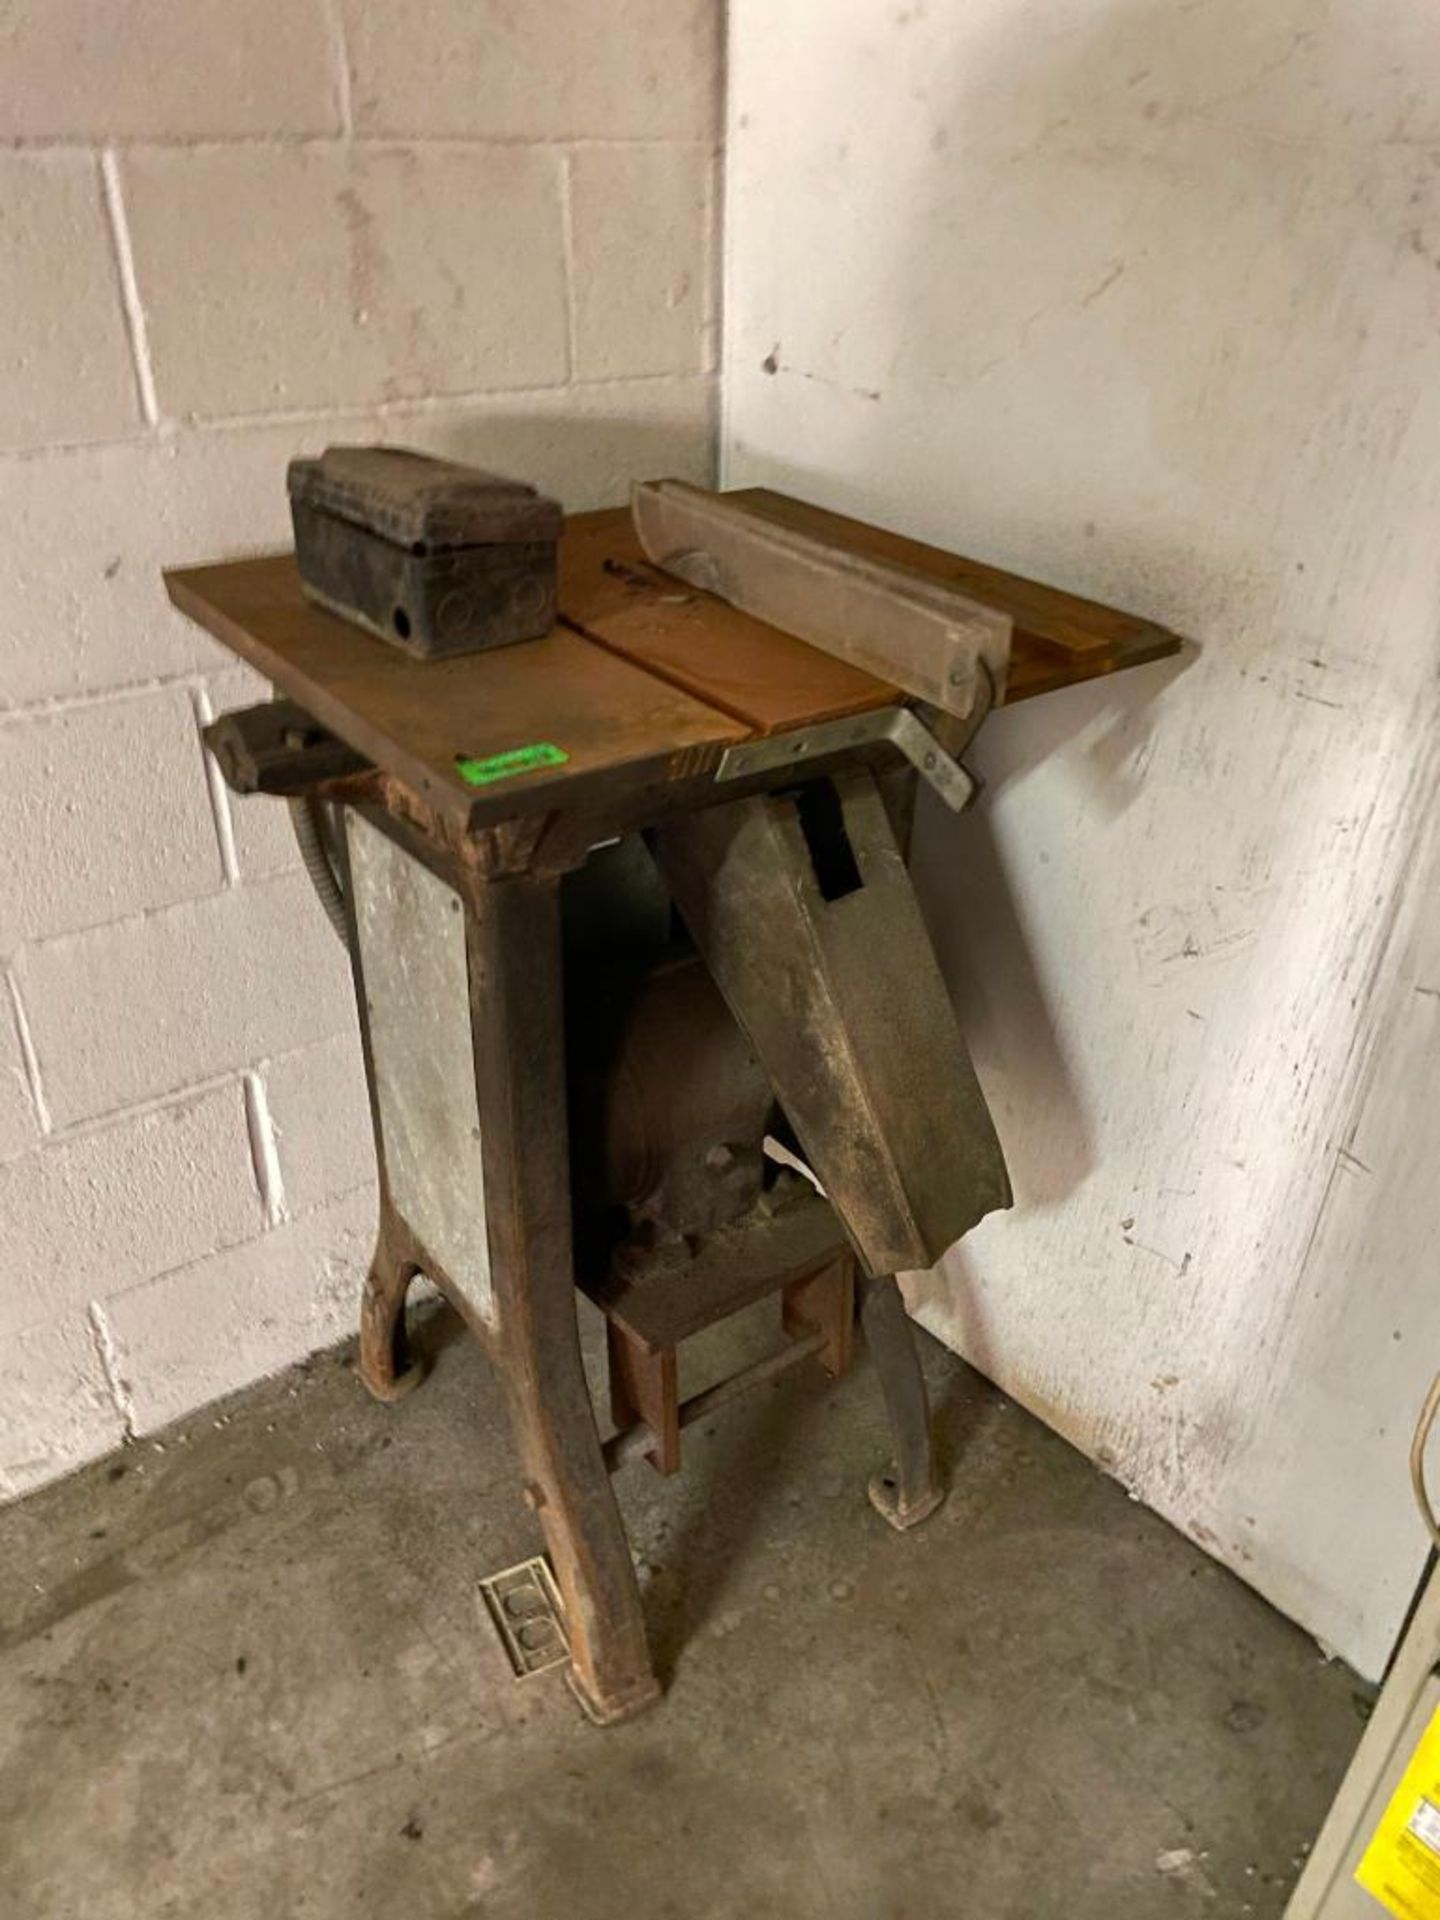 WILLIAMS LLOYD MACHINERY TABLE SAW ADDITIONAL INFO WORKING CONDITION UNKNOWN LOCATION PARTS ROOM QUA - Image 2 of 3